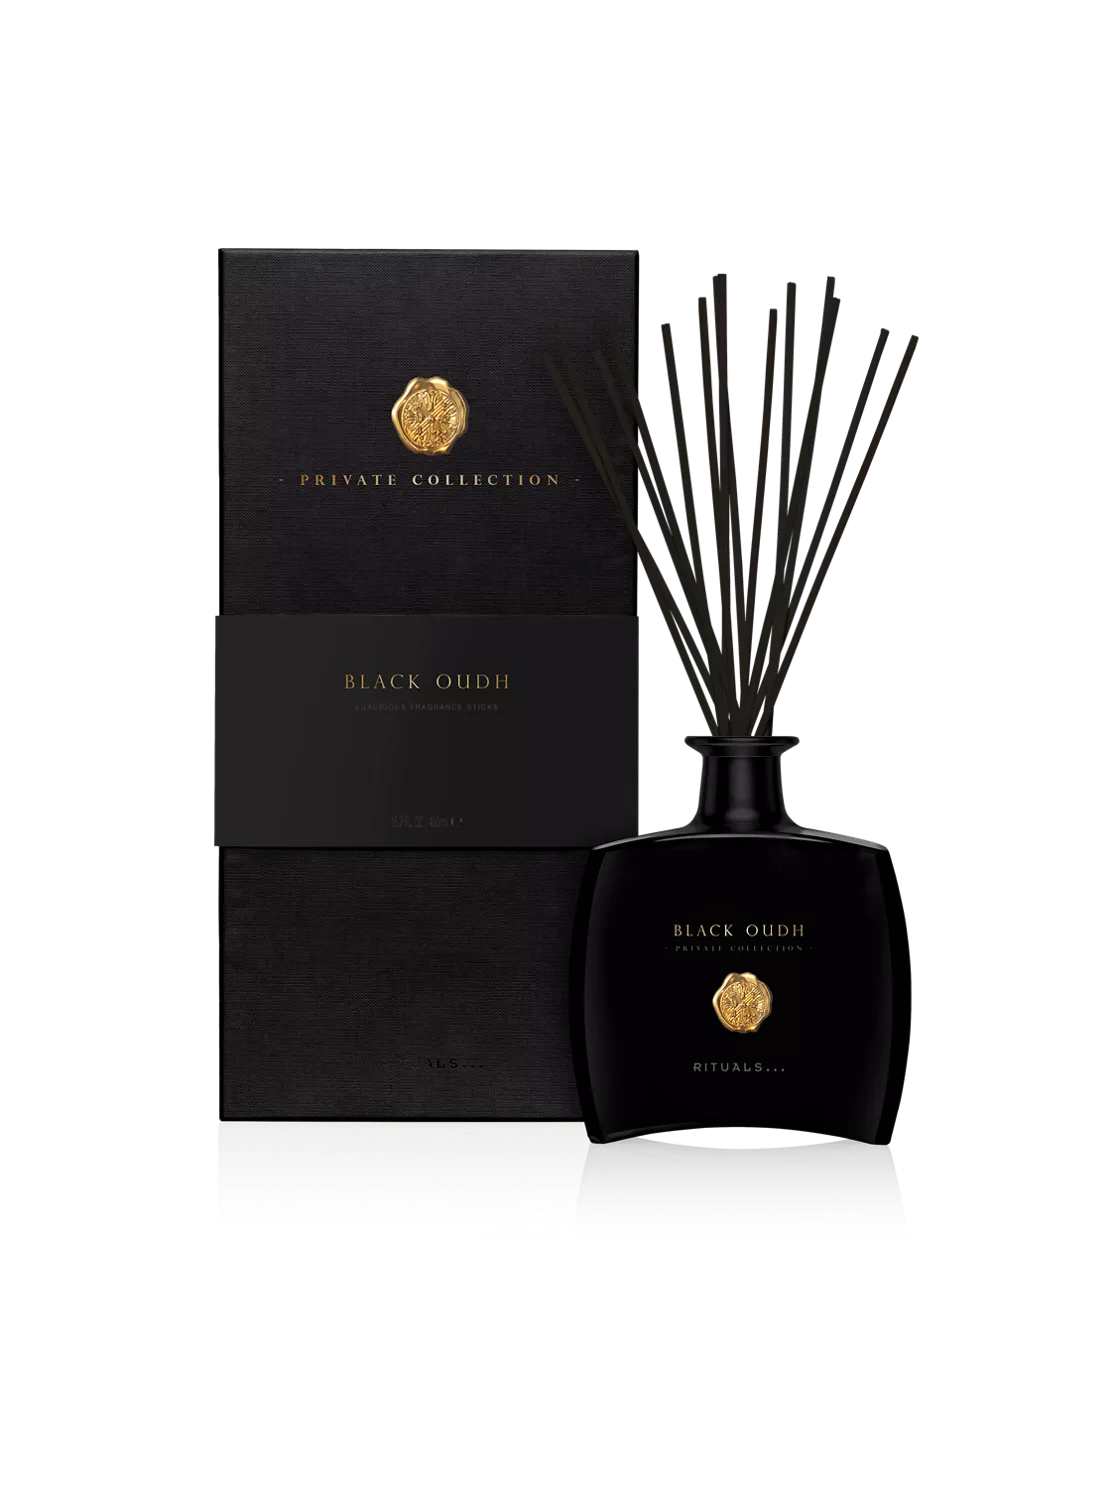 Private Collection Black Oudh Fragrance Sticks - luxurious